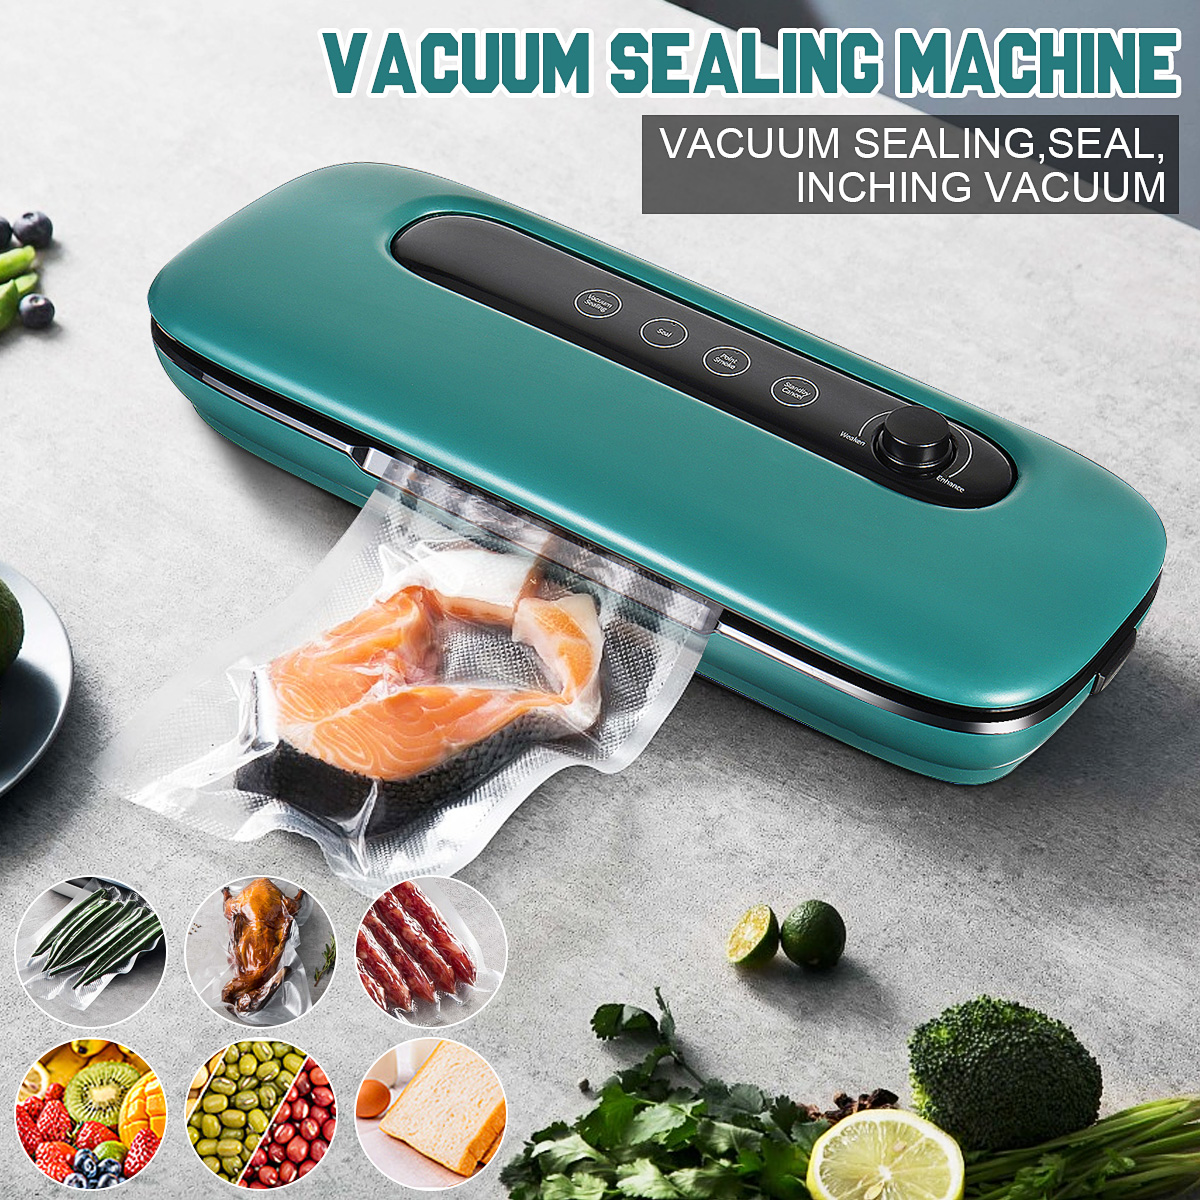 Vacuum-Sealer-Machine-Full-Automatic-Food-Sealer-Air-Sealing-System-for-Food-Storage-3-Functions-Ove-1928369-2